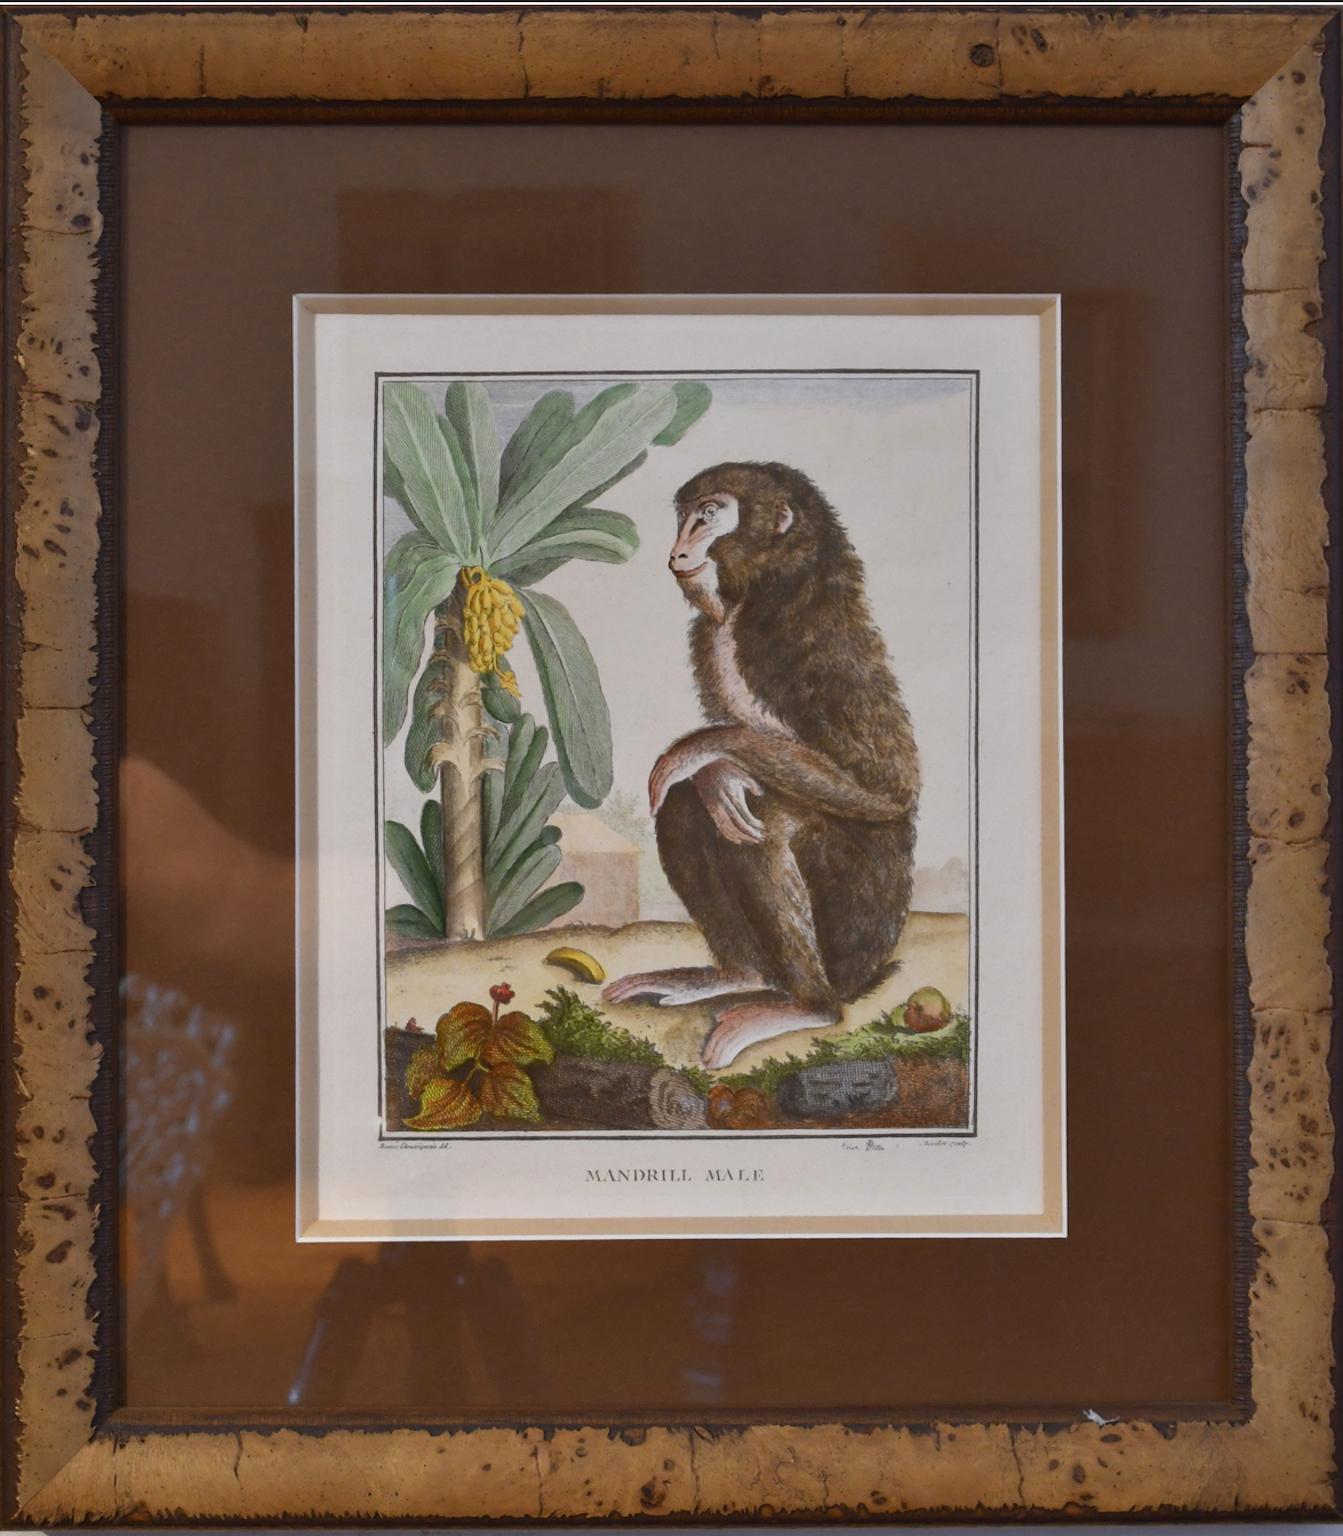 Set of 4 Framed 18th Century Hand-Colored Engravings of Monkeys by G. Buffon In Good Condition For Sale In Miami, FL